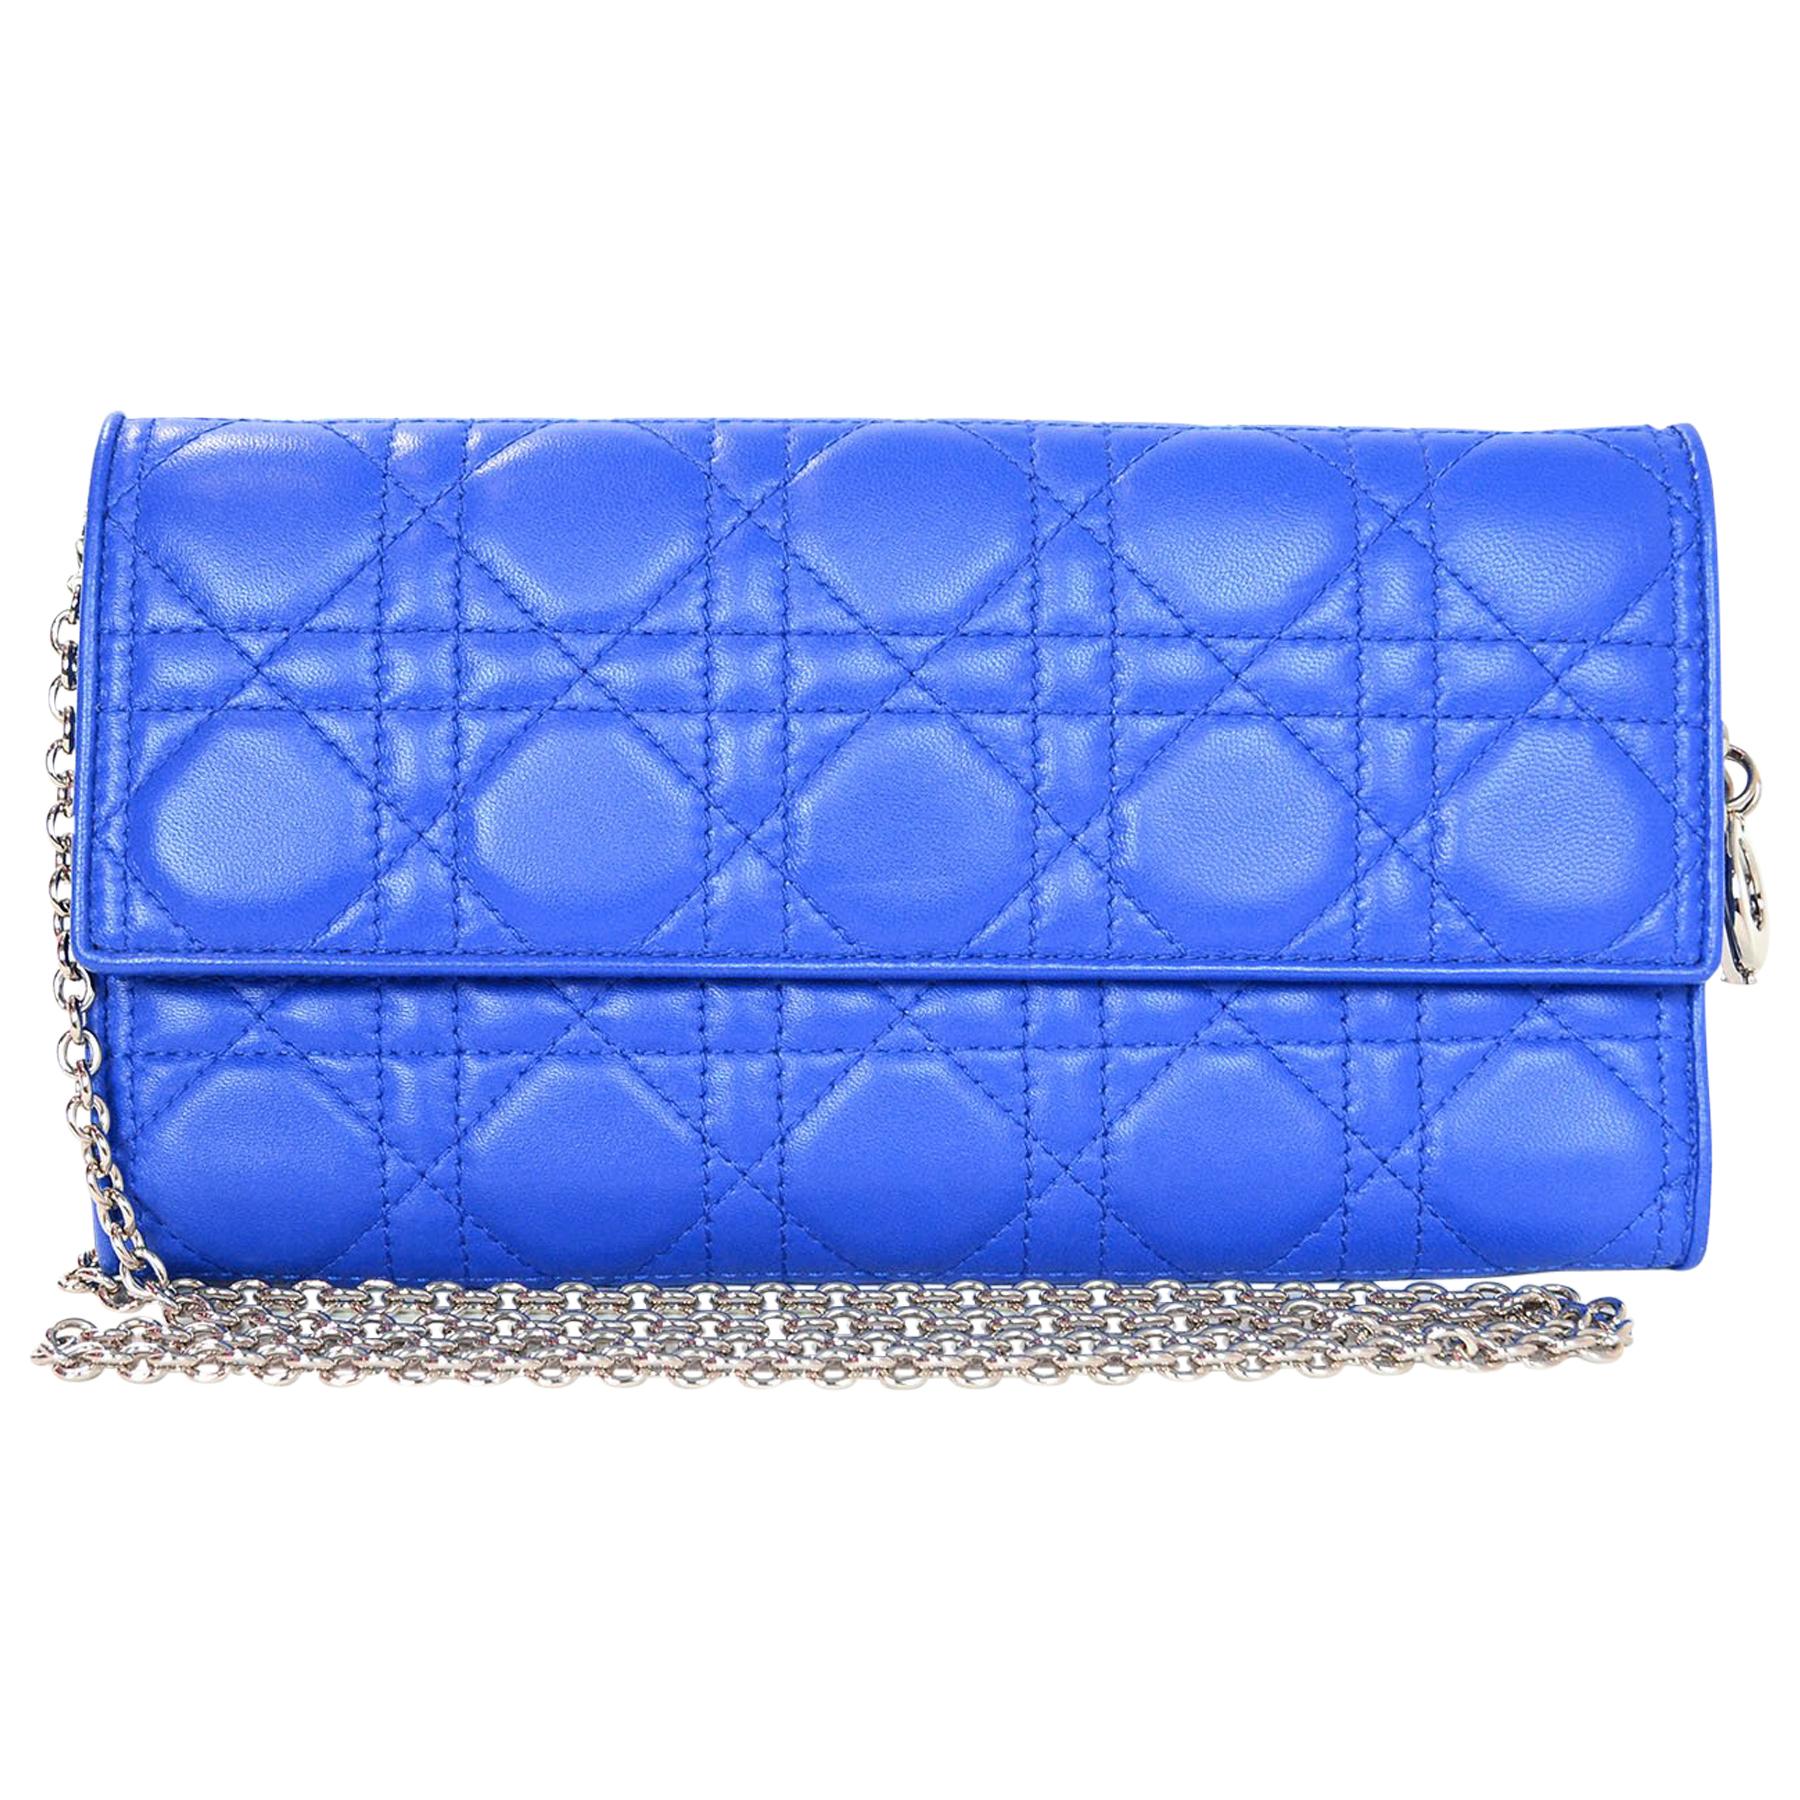 Christian Dior Cobalt Blue Cannage Rendezvous Wallet On Chain WOC Crossbody Bag